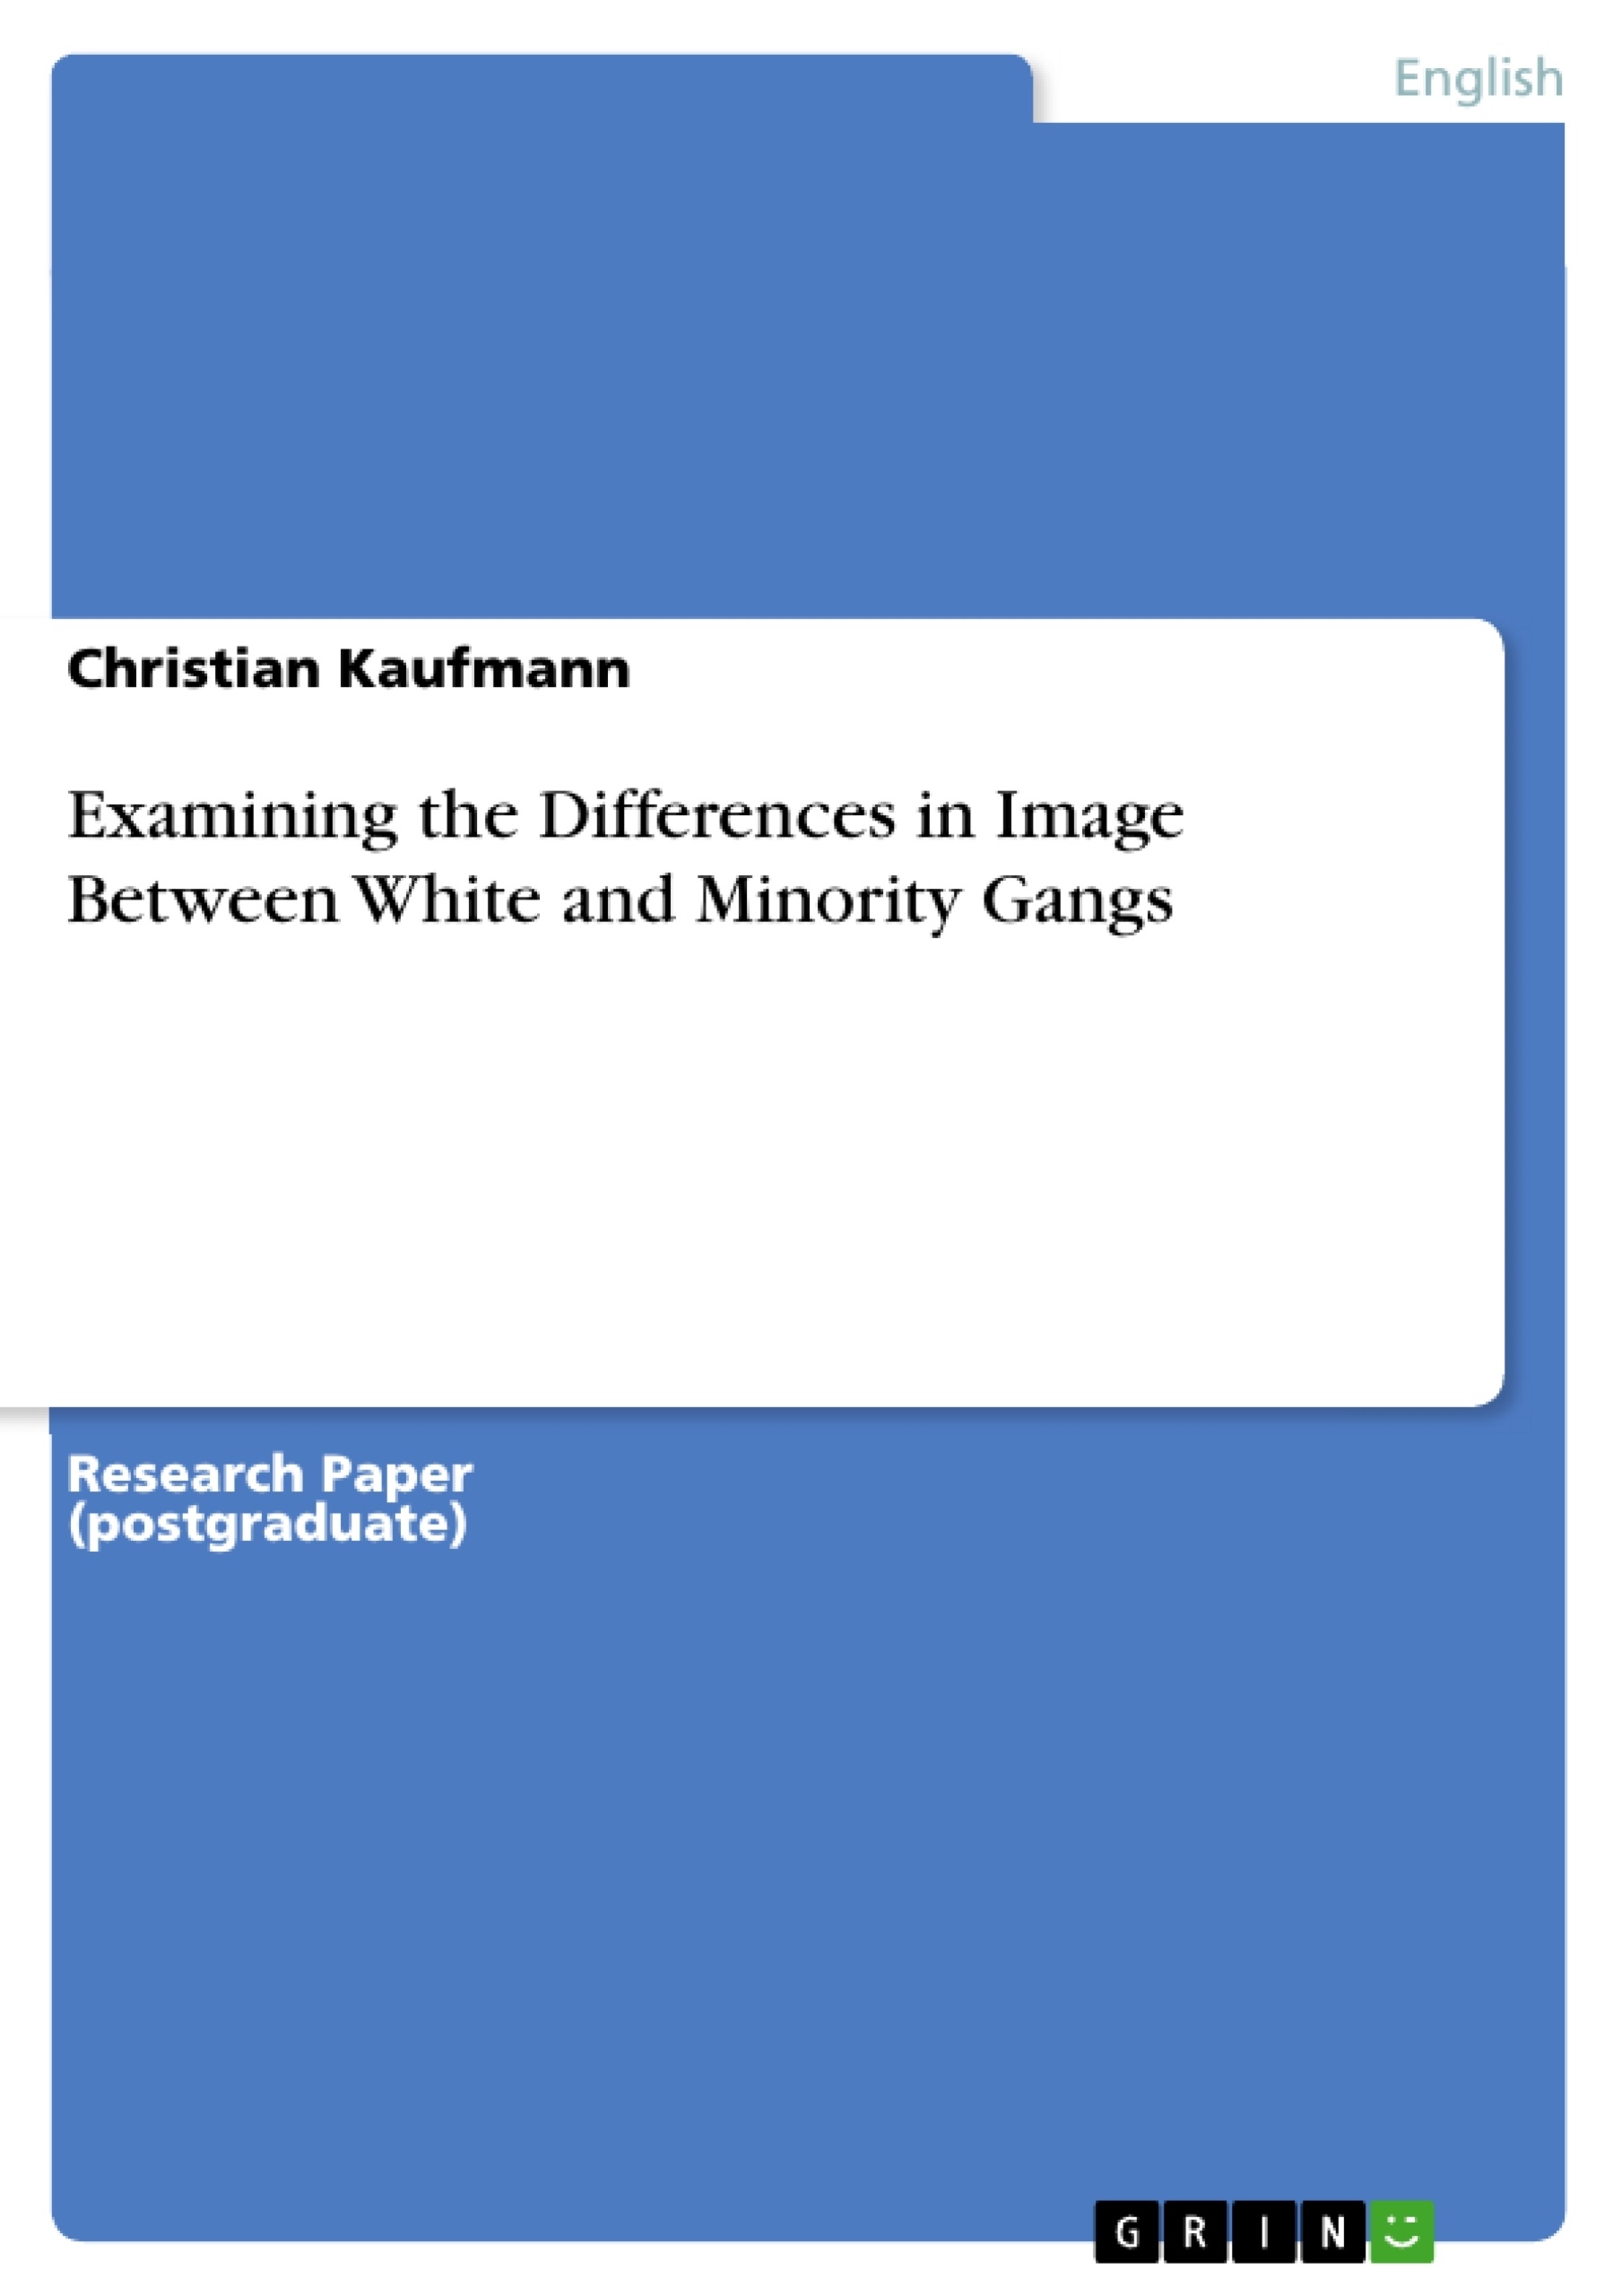 Title: Examining the Differences in Image Between White and Minority Gangs